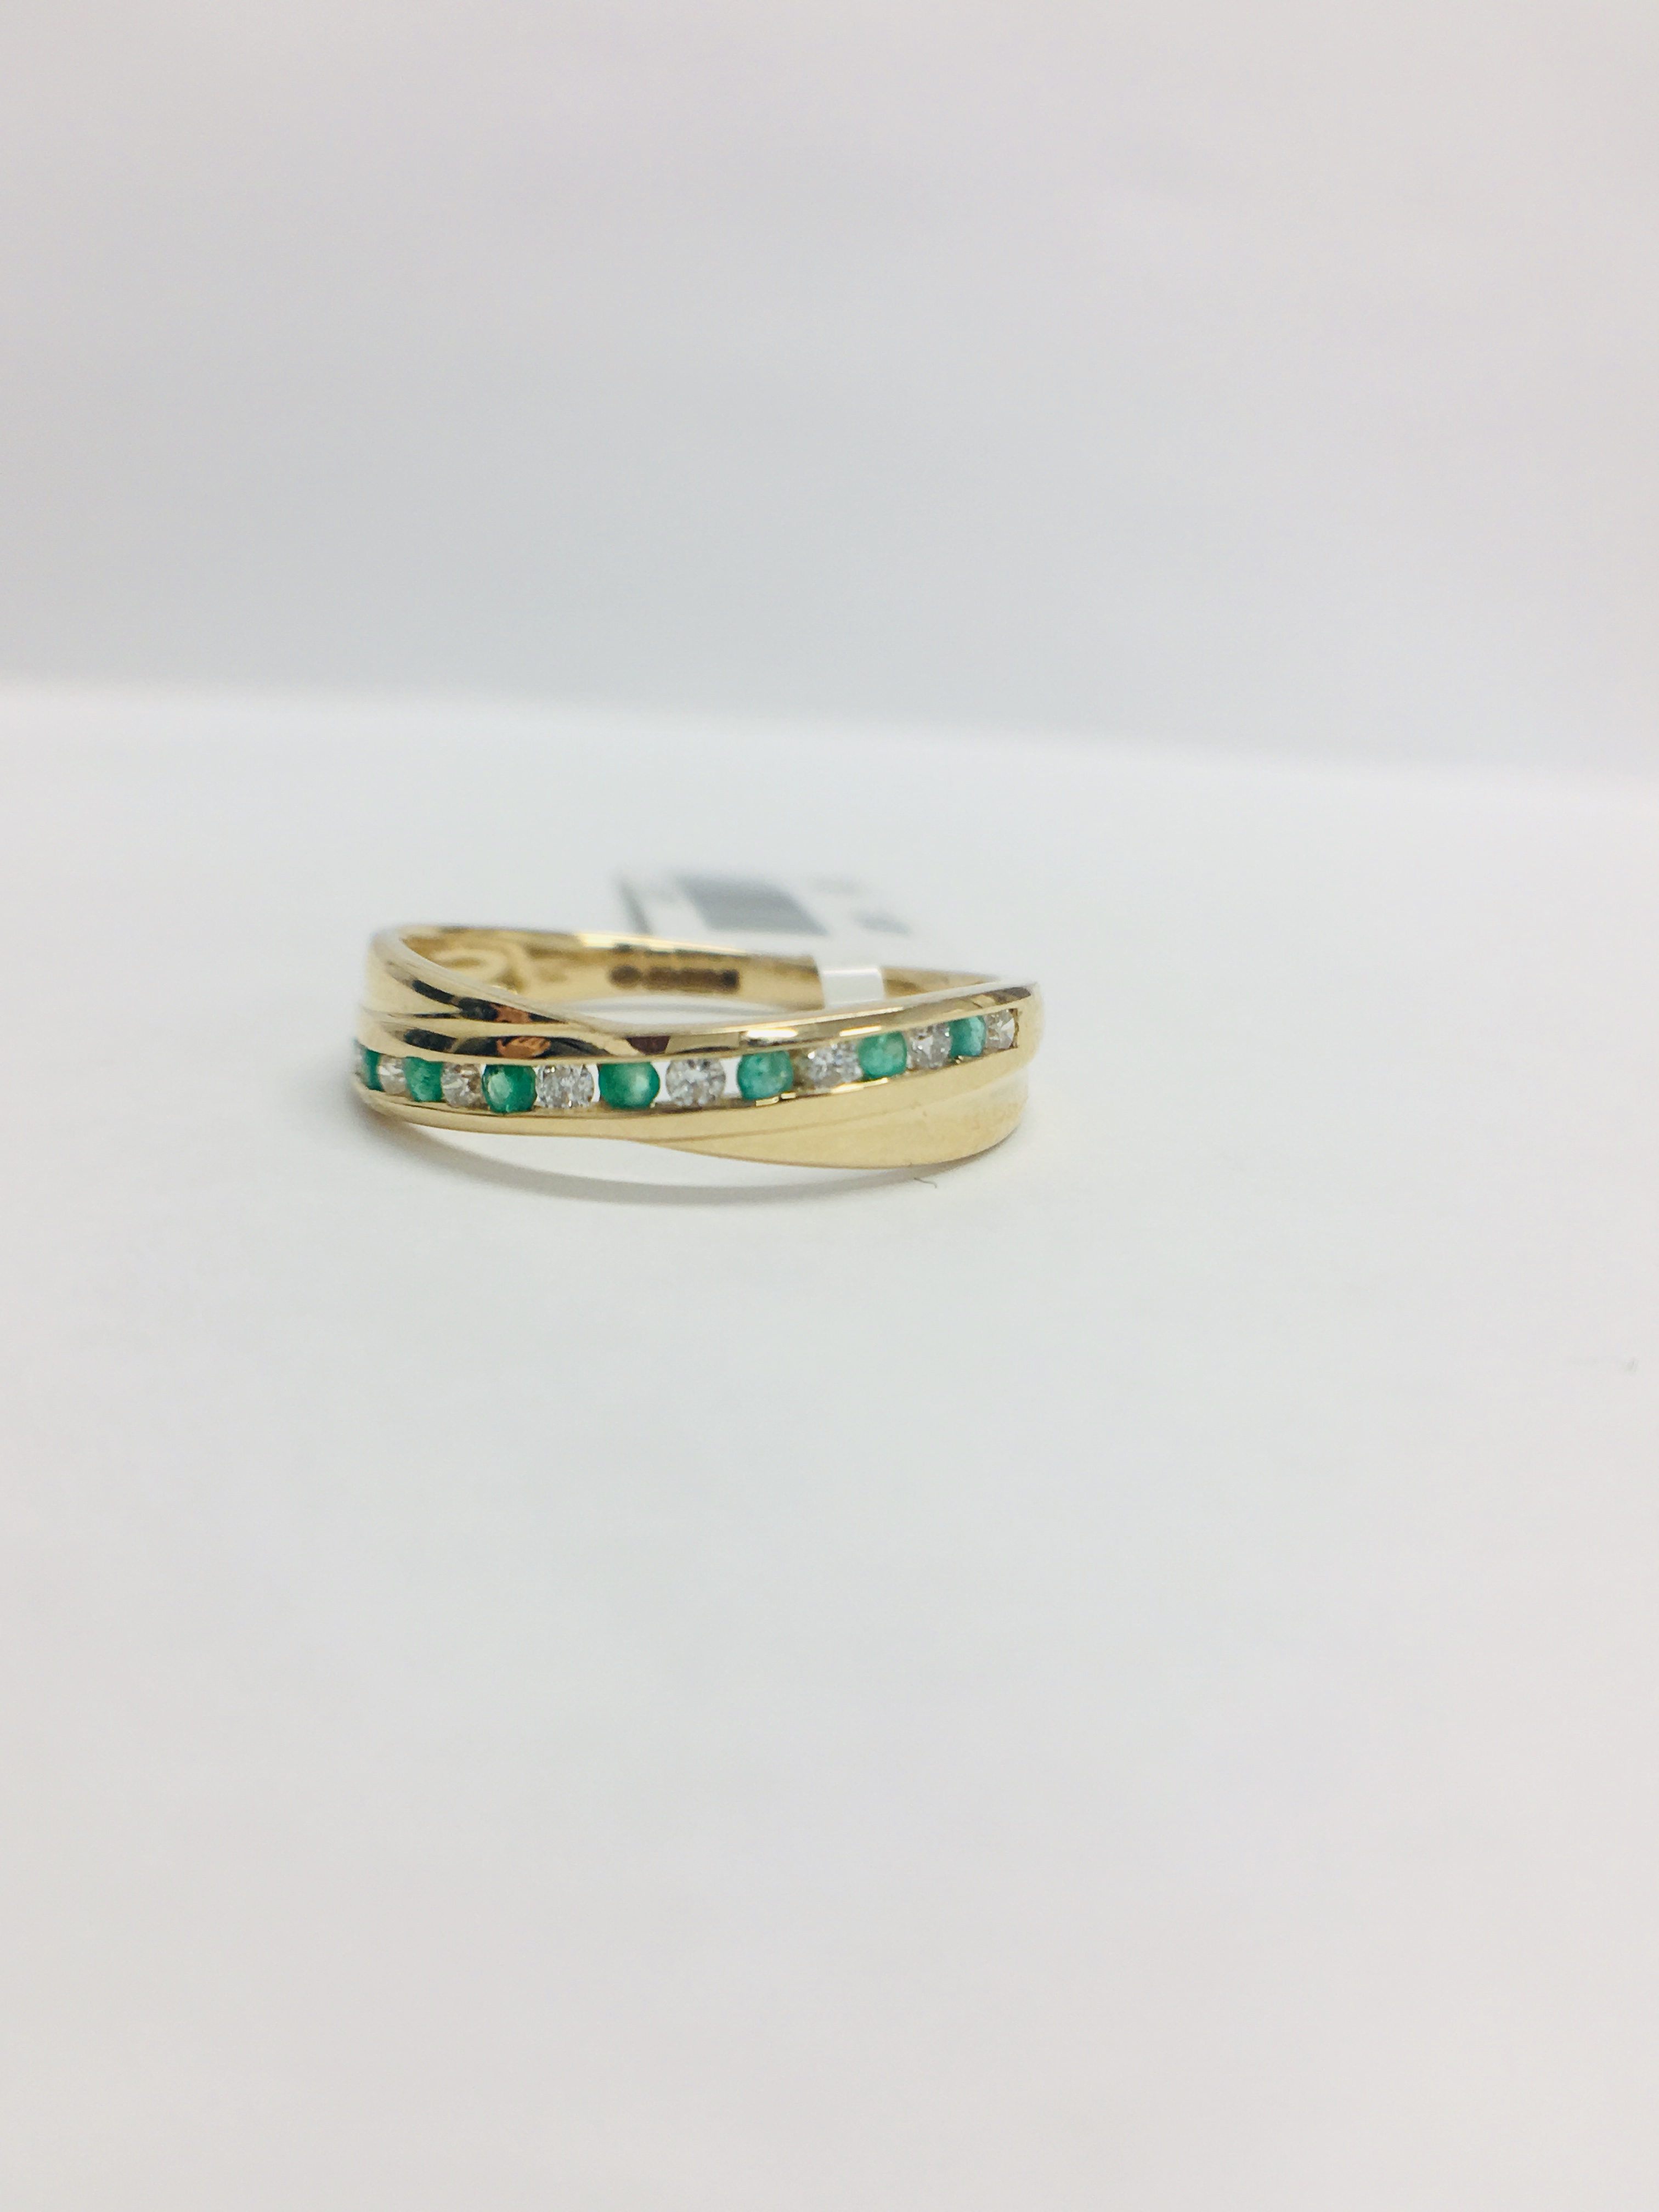 9Ct Yellow Gold Emerald Diamond Crossover Band Ring, - Image 9 of 11